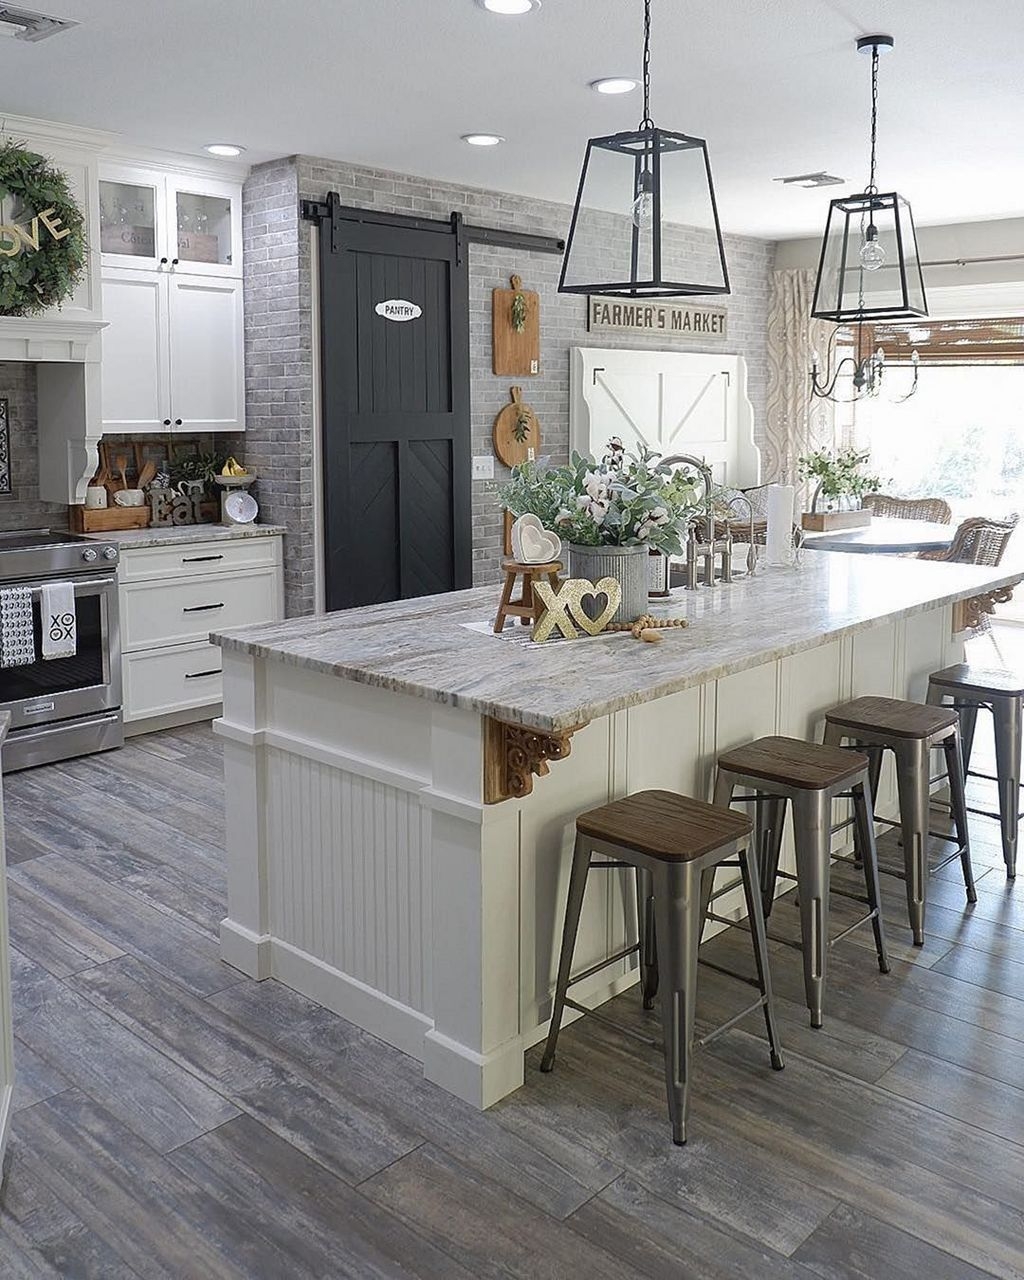 Rustic Farmhouse Kitchen Ideas To Get Traditional Accent 38